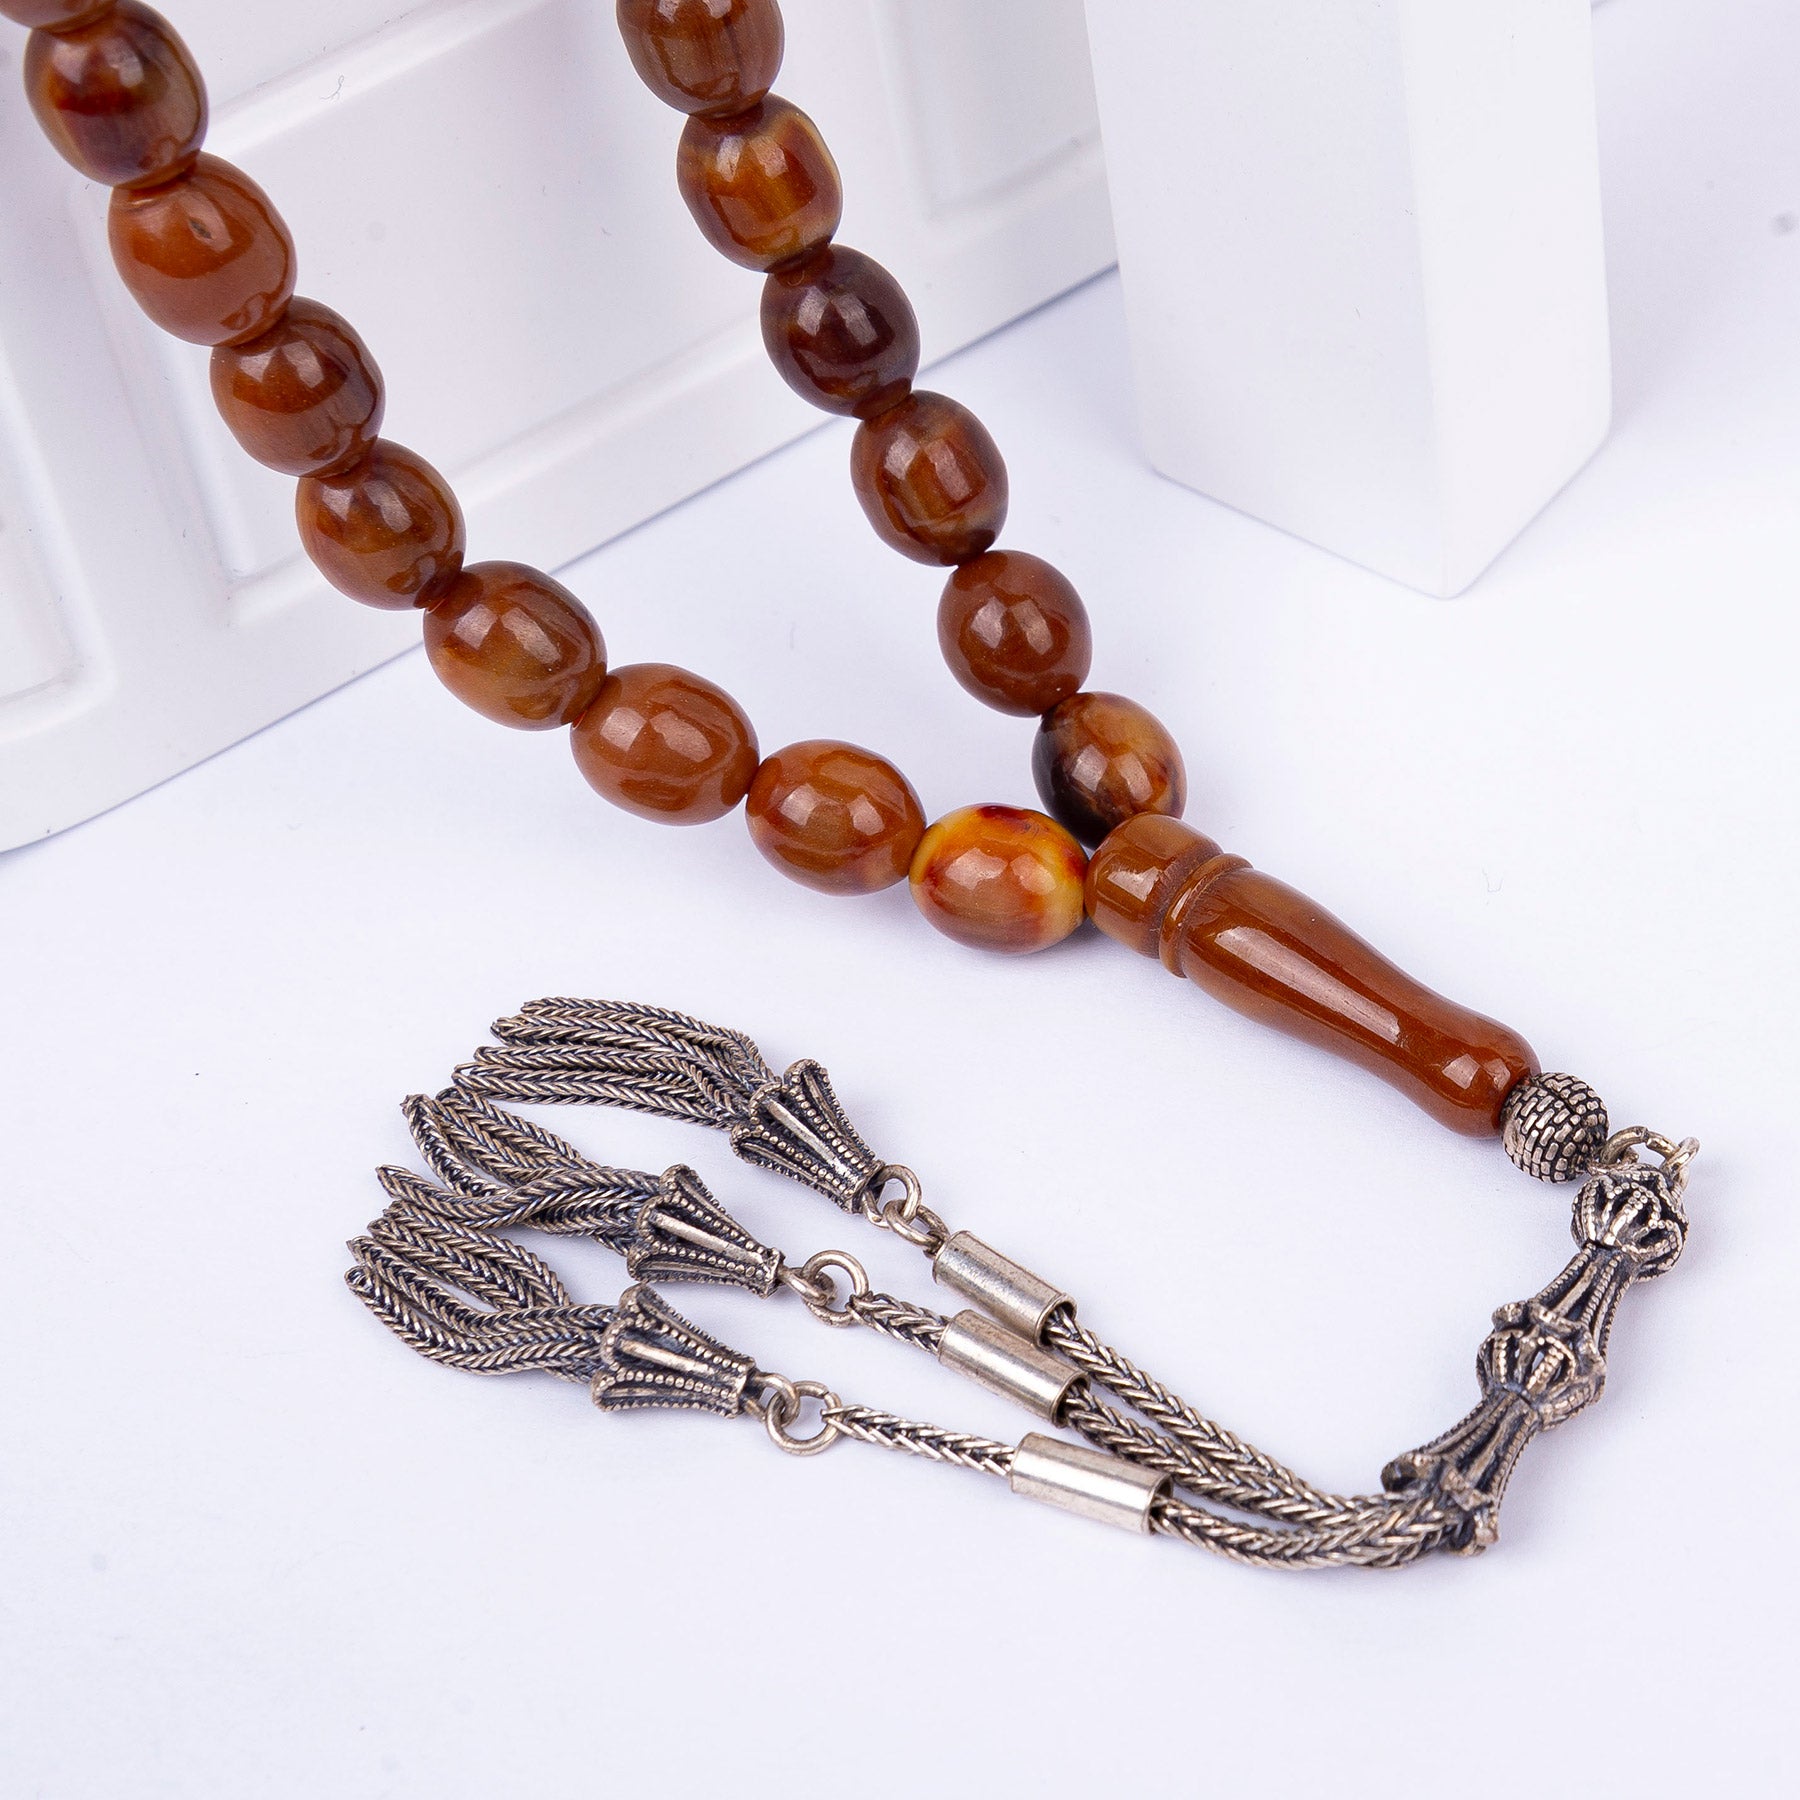 Solid Cut Czechoslovak Katalin Rosary with Silver Tassels 2